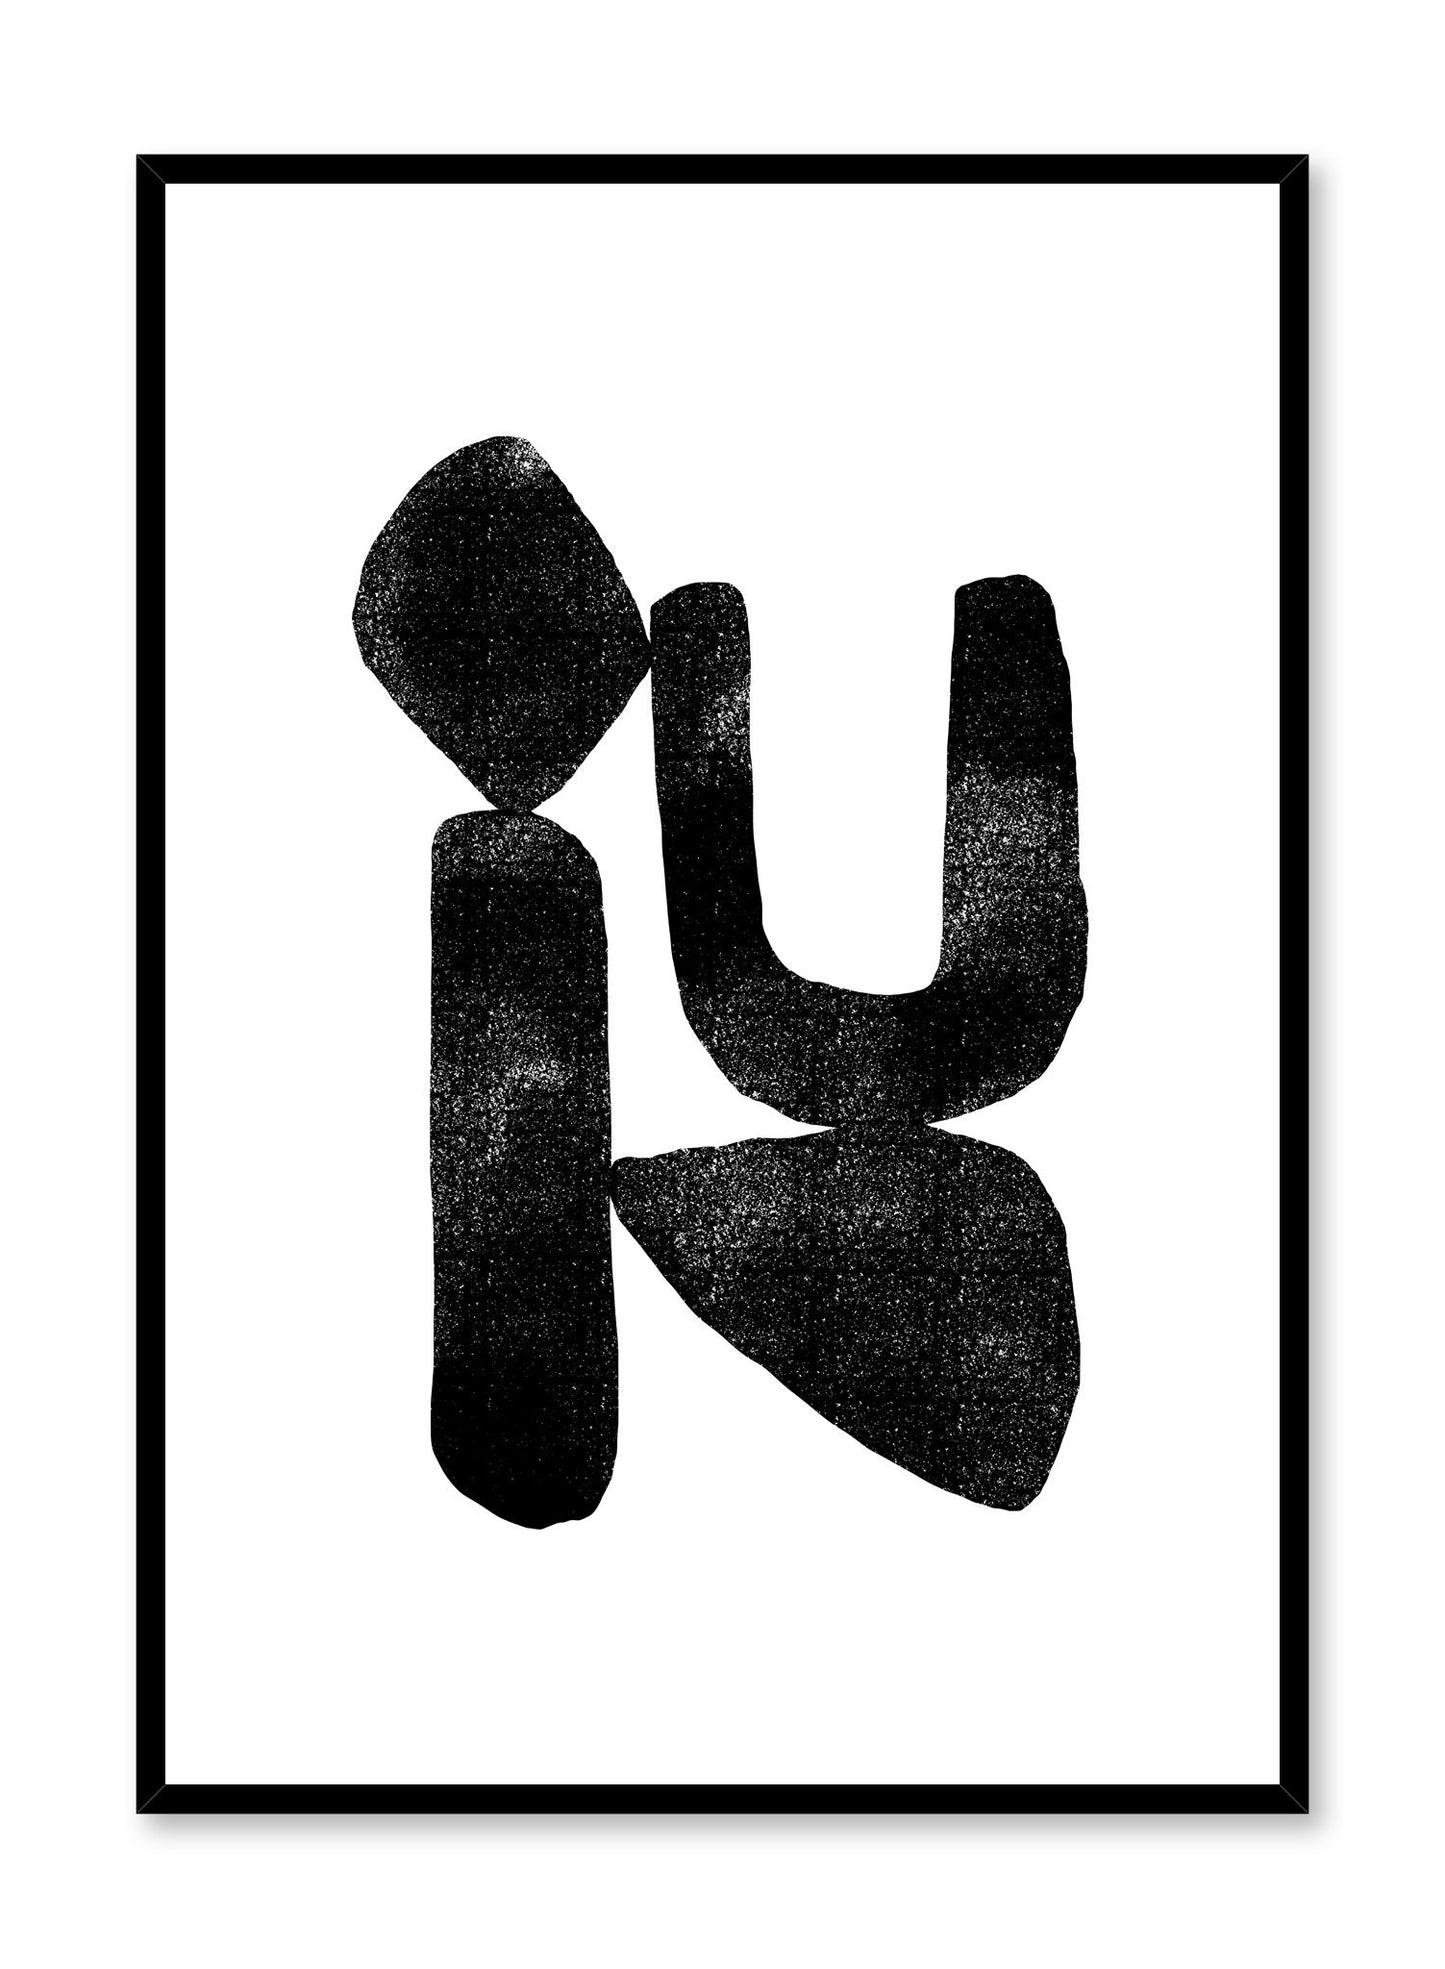 Modern minimalist poster by Opposite Wall with abstract I and U letters